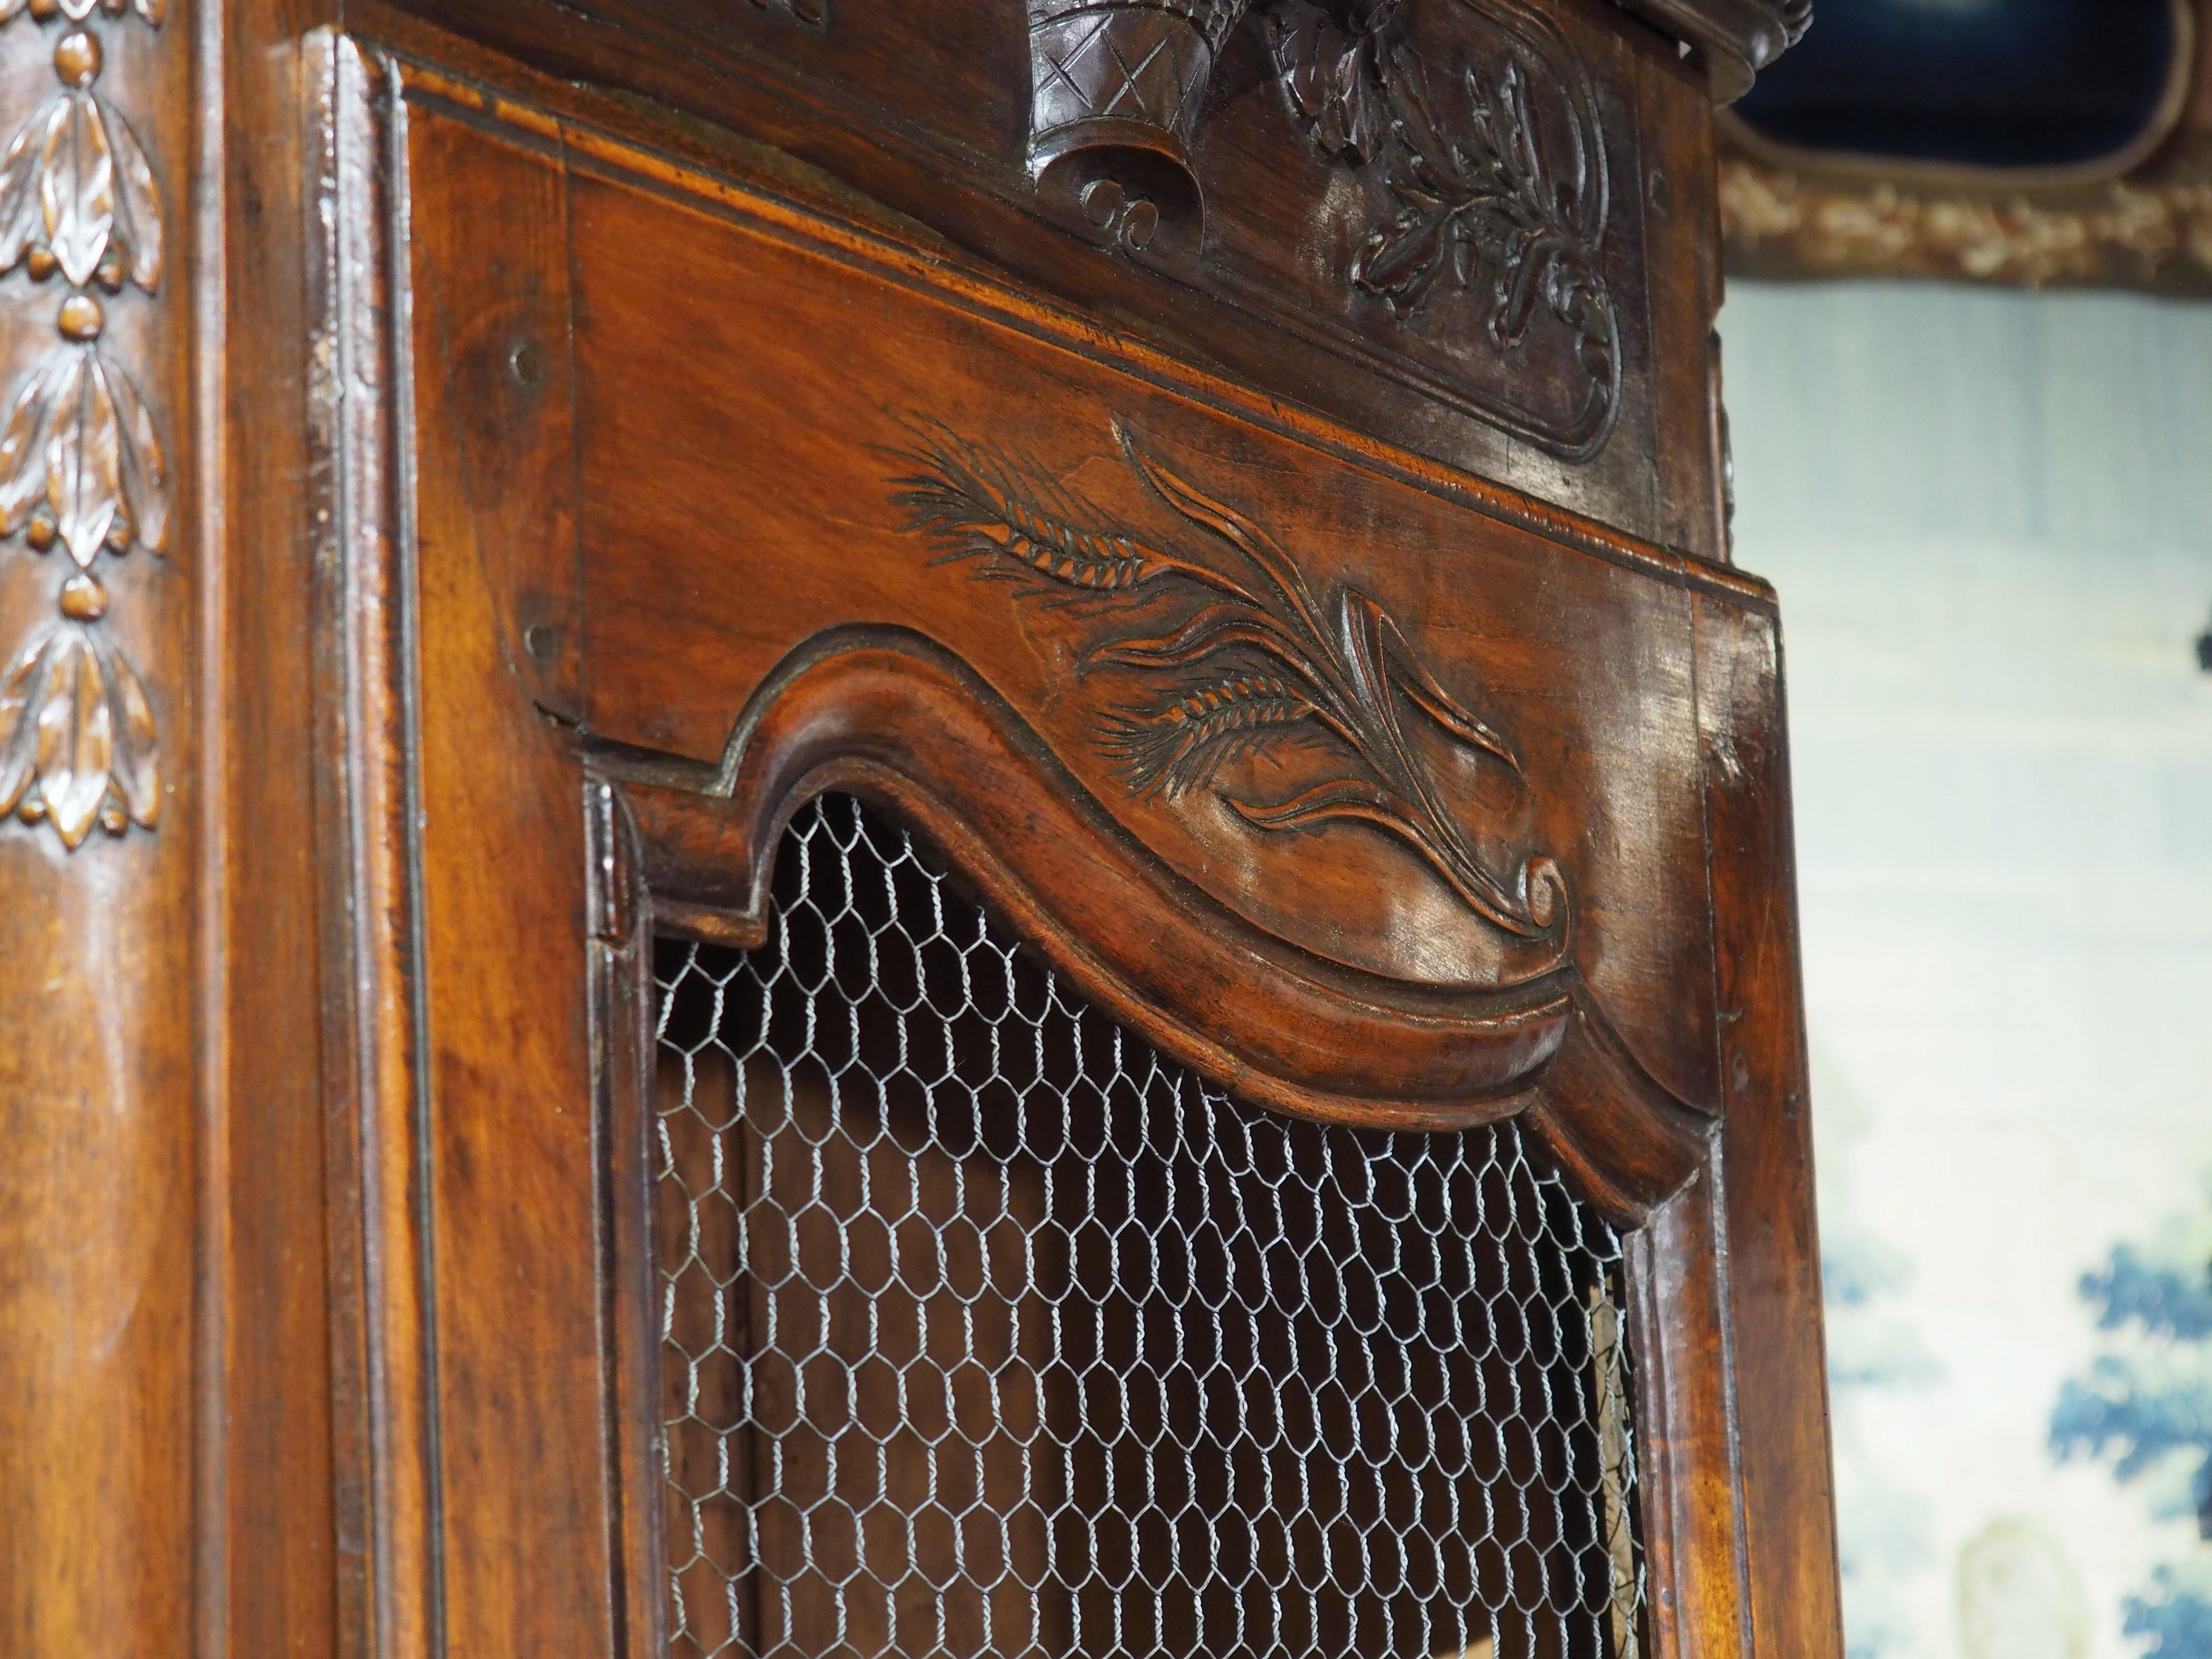 From Provence, France, this rare pair of bonnetieres was hand-carved in walnut wood in the 1800’s. A bonnetiere is a tall and narrow storage cabinet, like an armoire, but typically smaller and with one door. Typically found in the entrances of